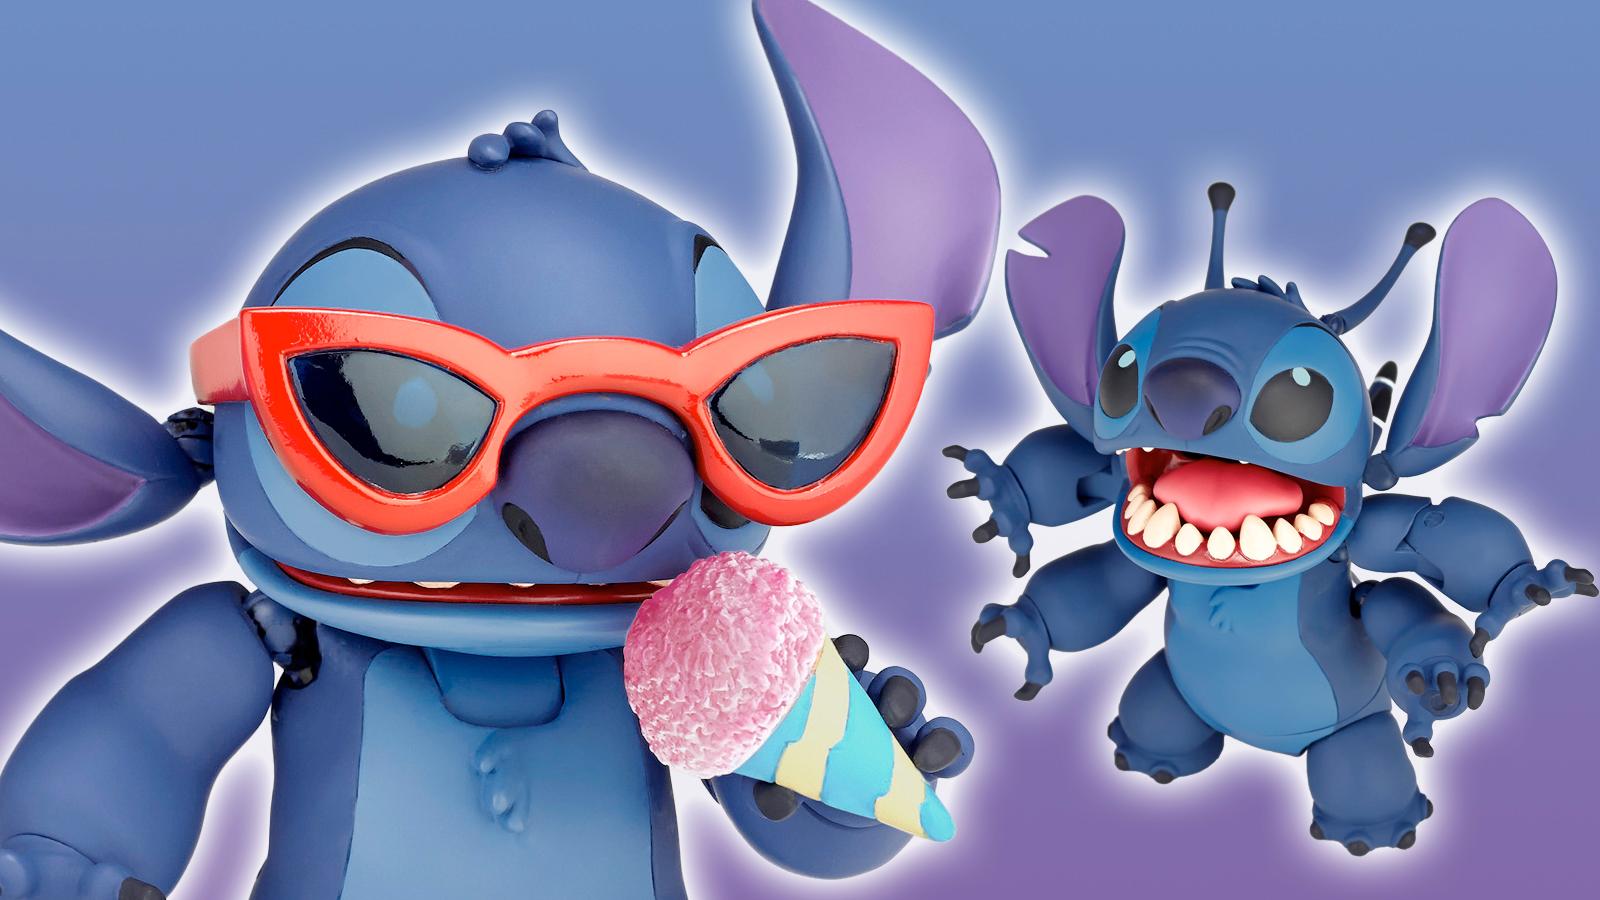 revoltech stitch with glasses, ice cream and in the background, with all alien parts out